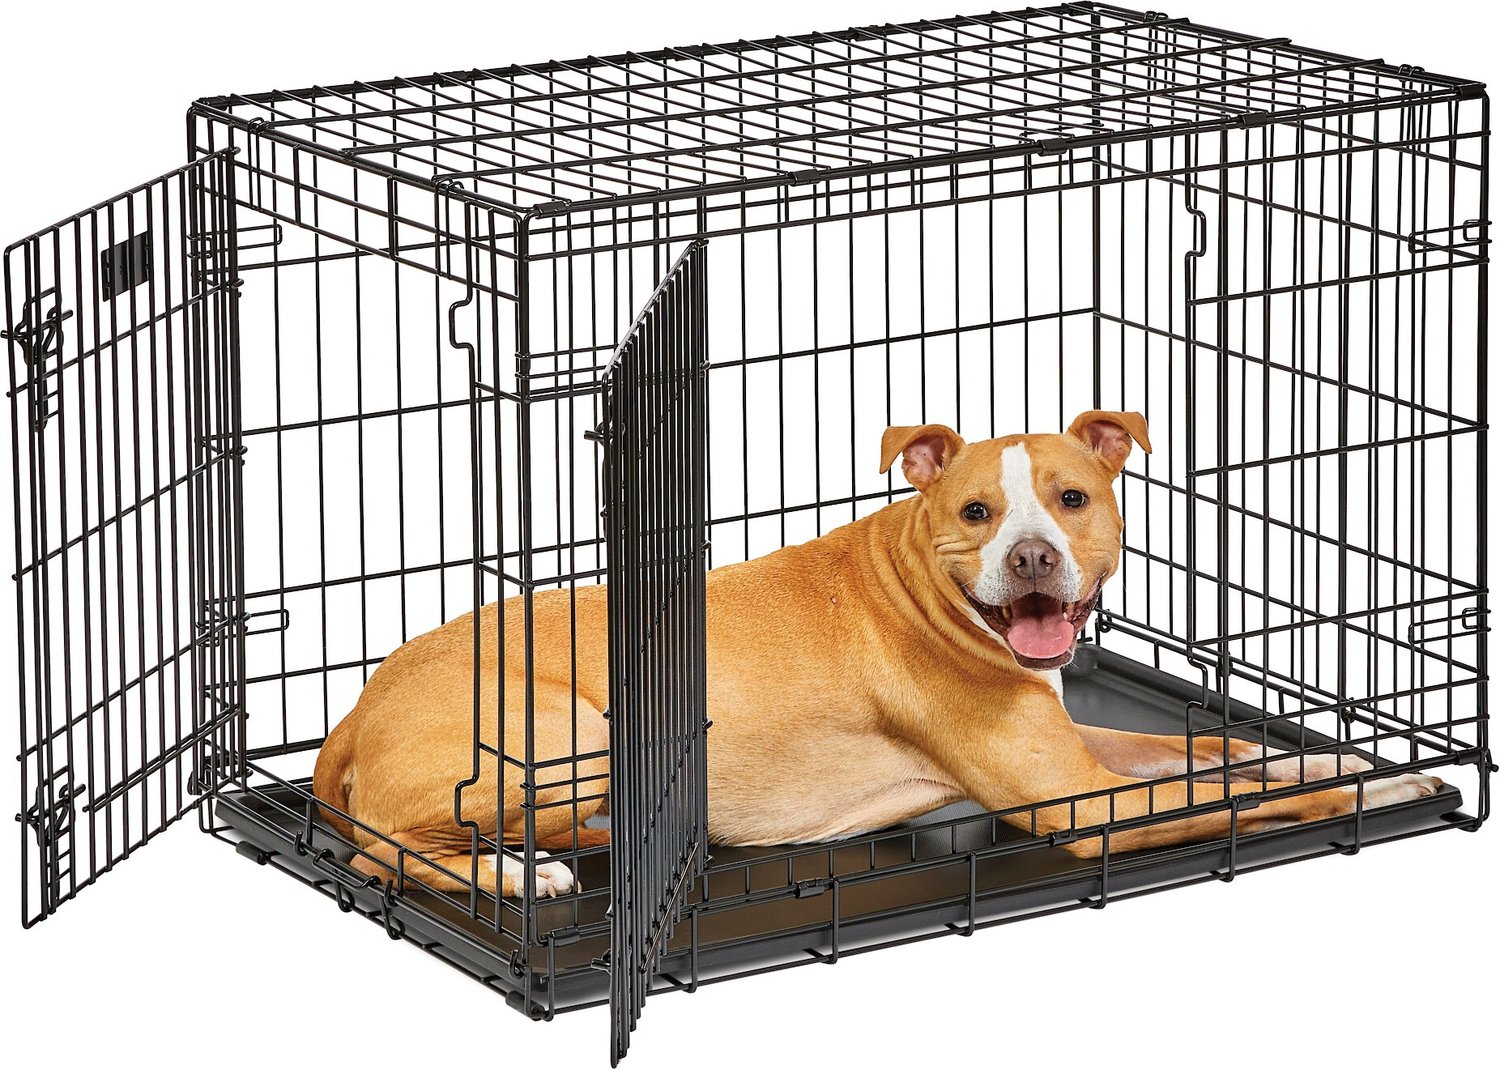 36″ Double Door Folding Metal Dog iCrate by Midwest